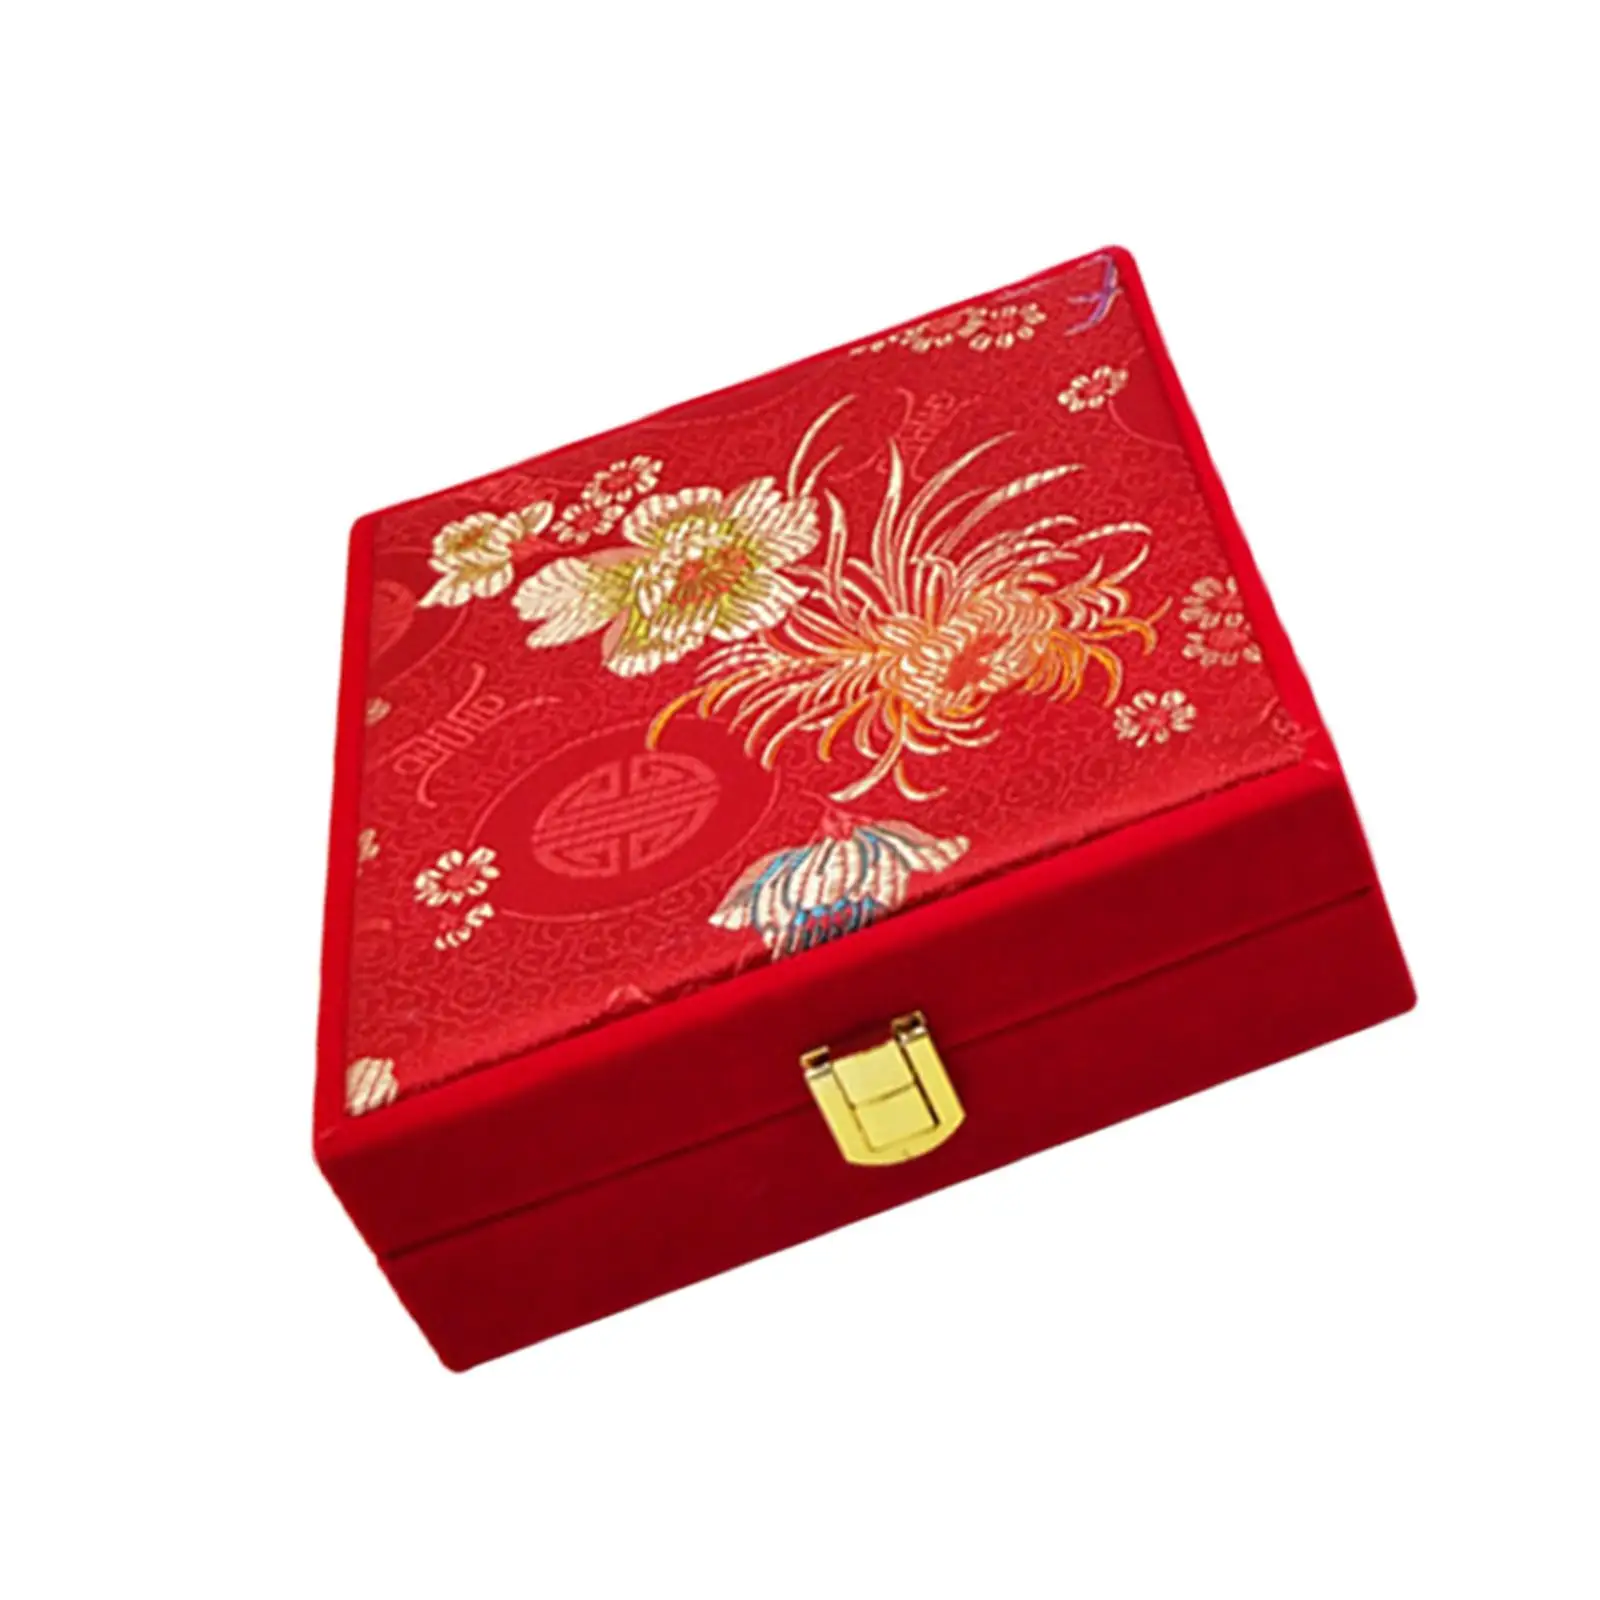 Multifunctional Jewelry Display Box Chinese Style Red Velvet Showcase Container Packaging Case Organizer for Anniversary Day